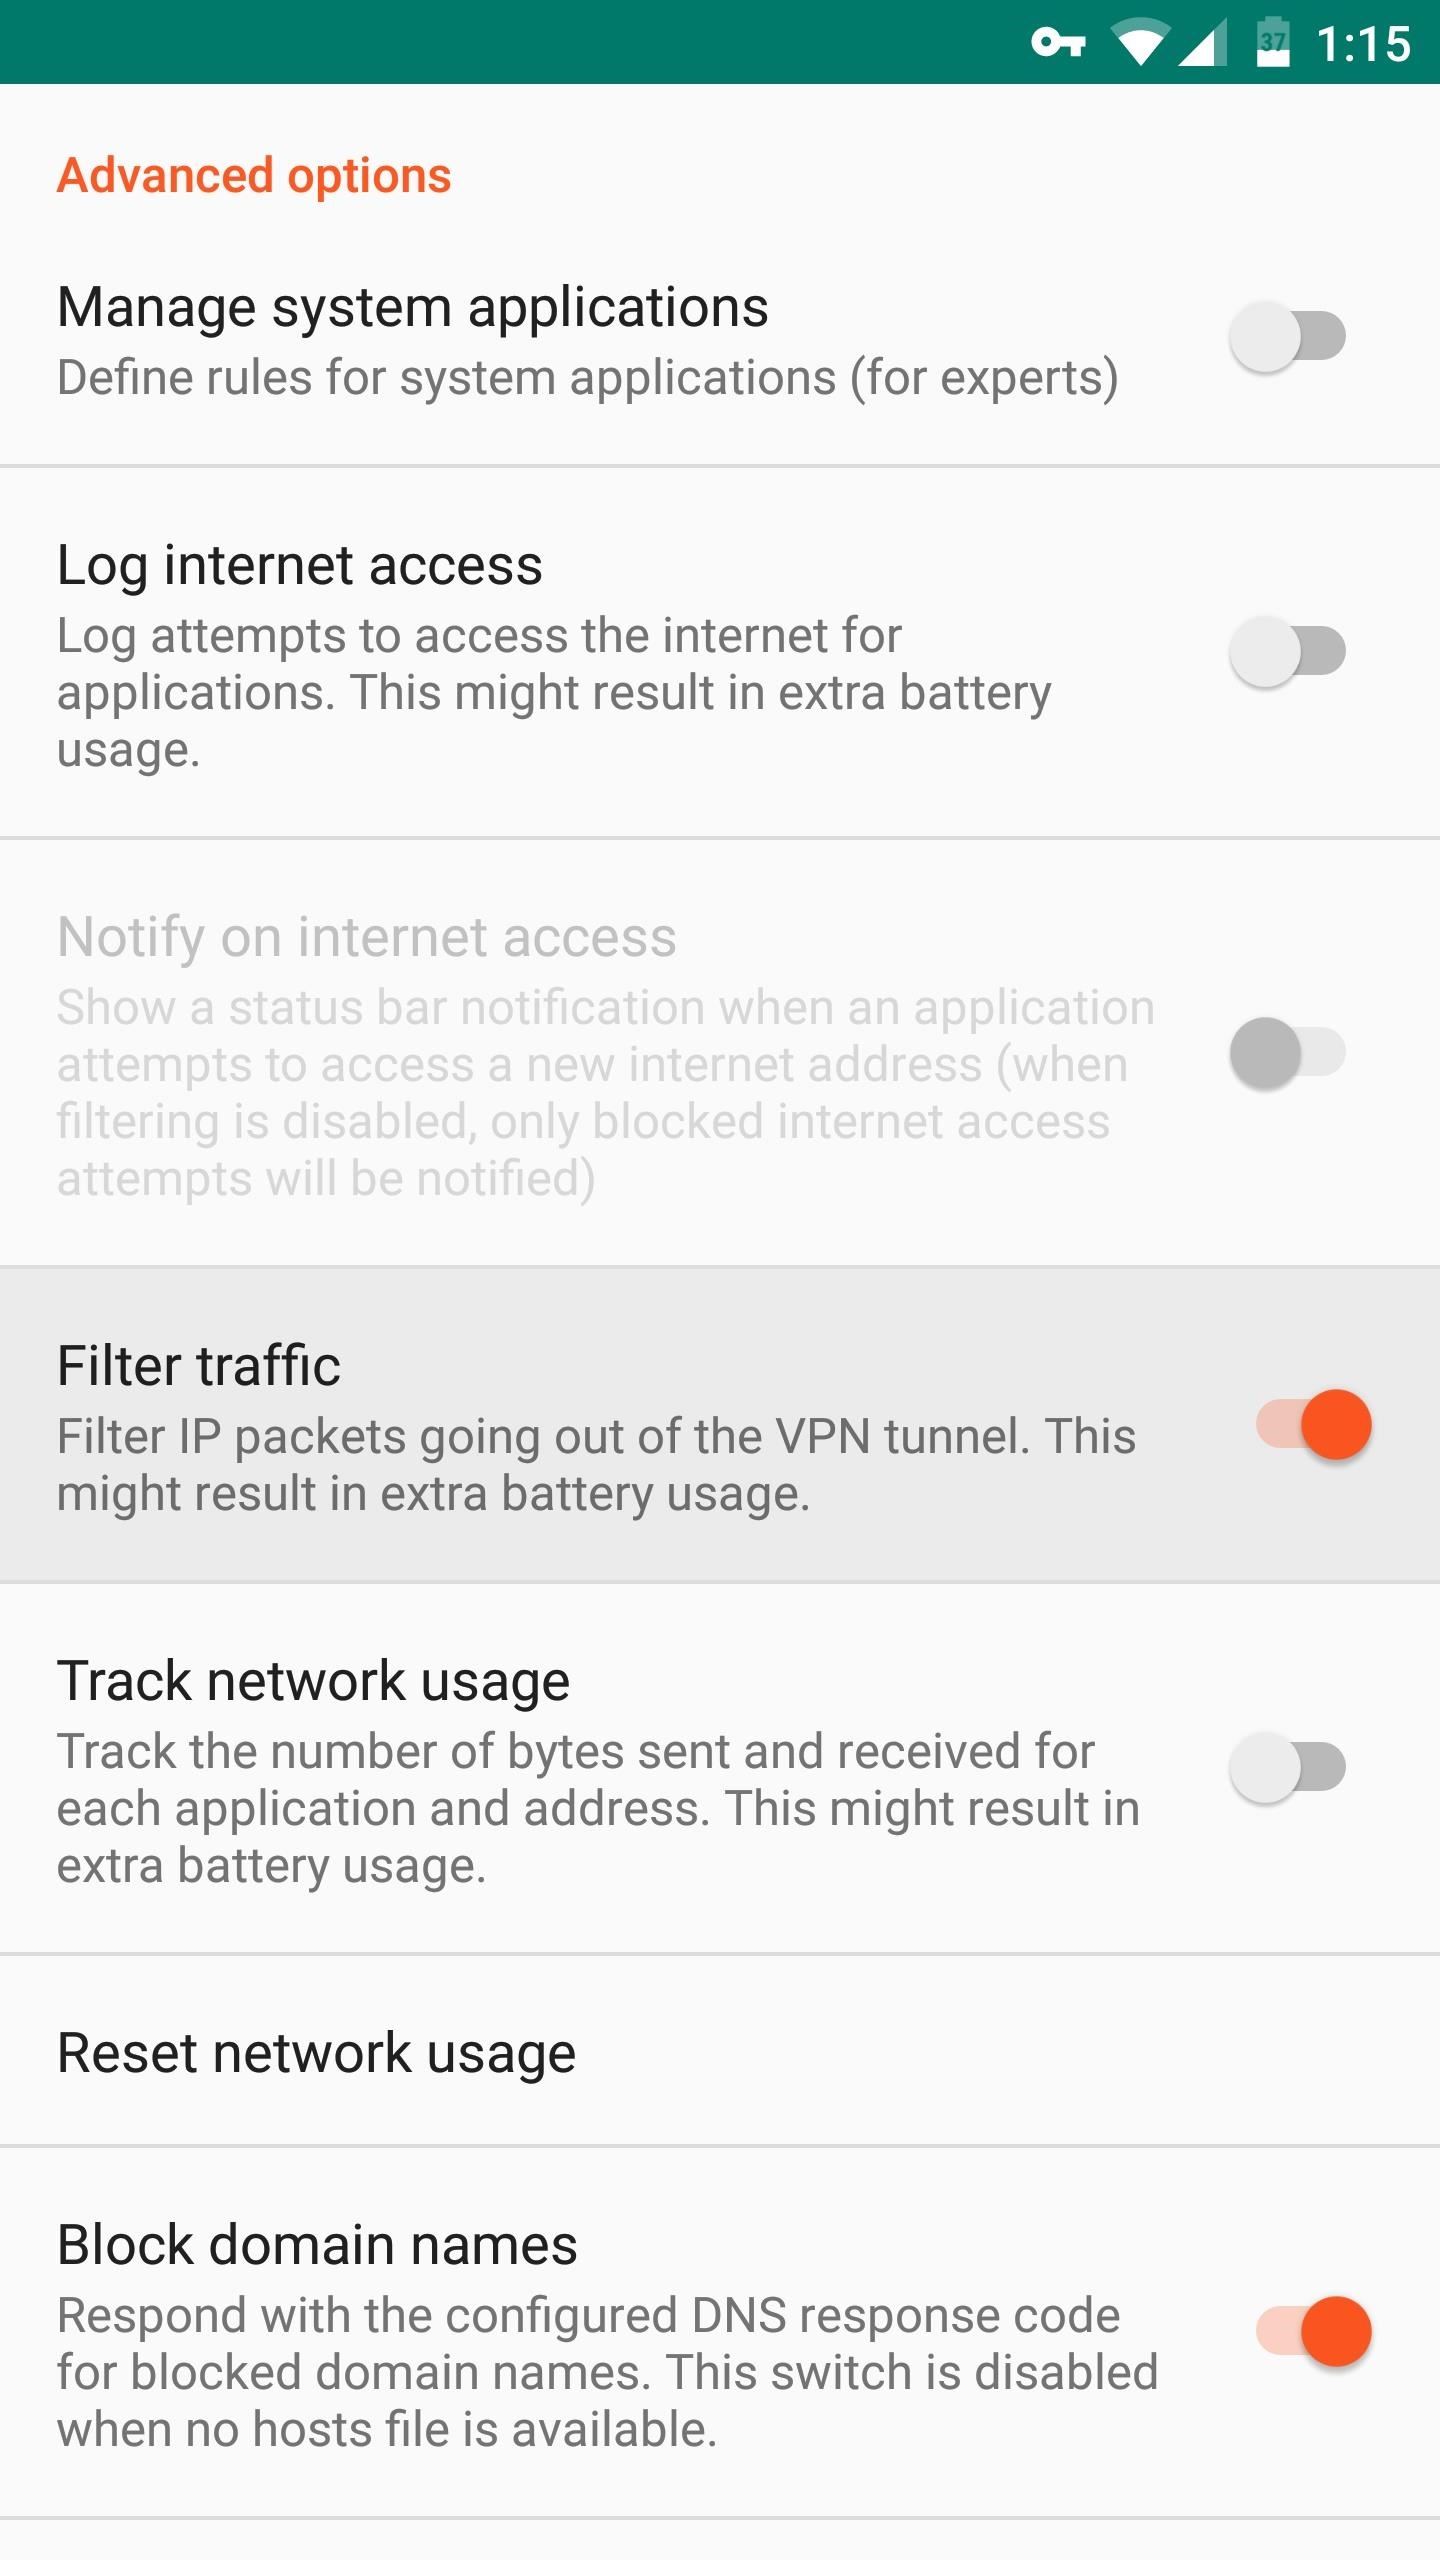 Enable NetGuard's Hidden Ad-Blocking Feature on Your Android Phone